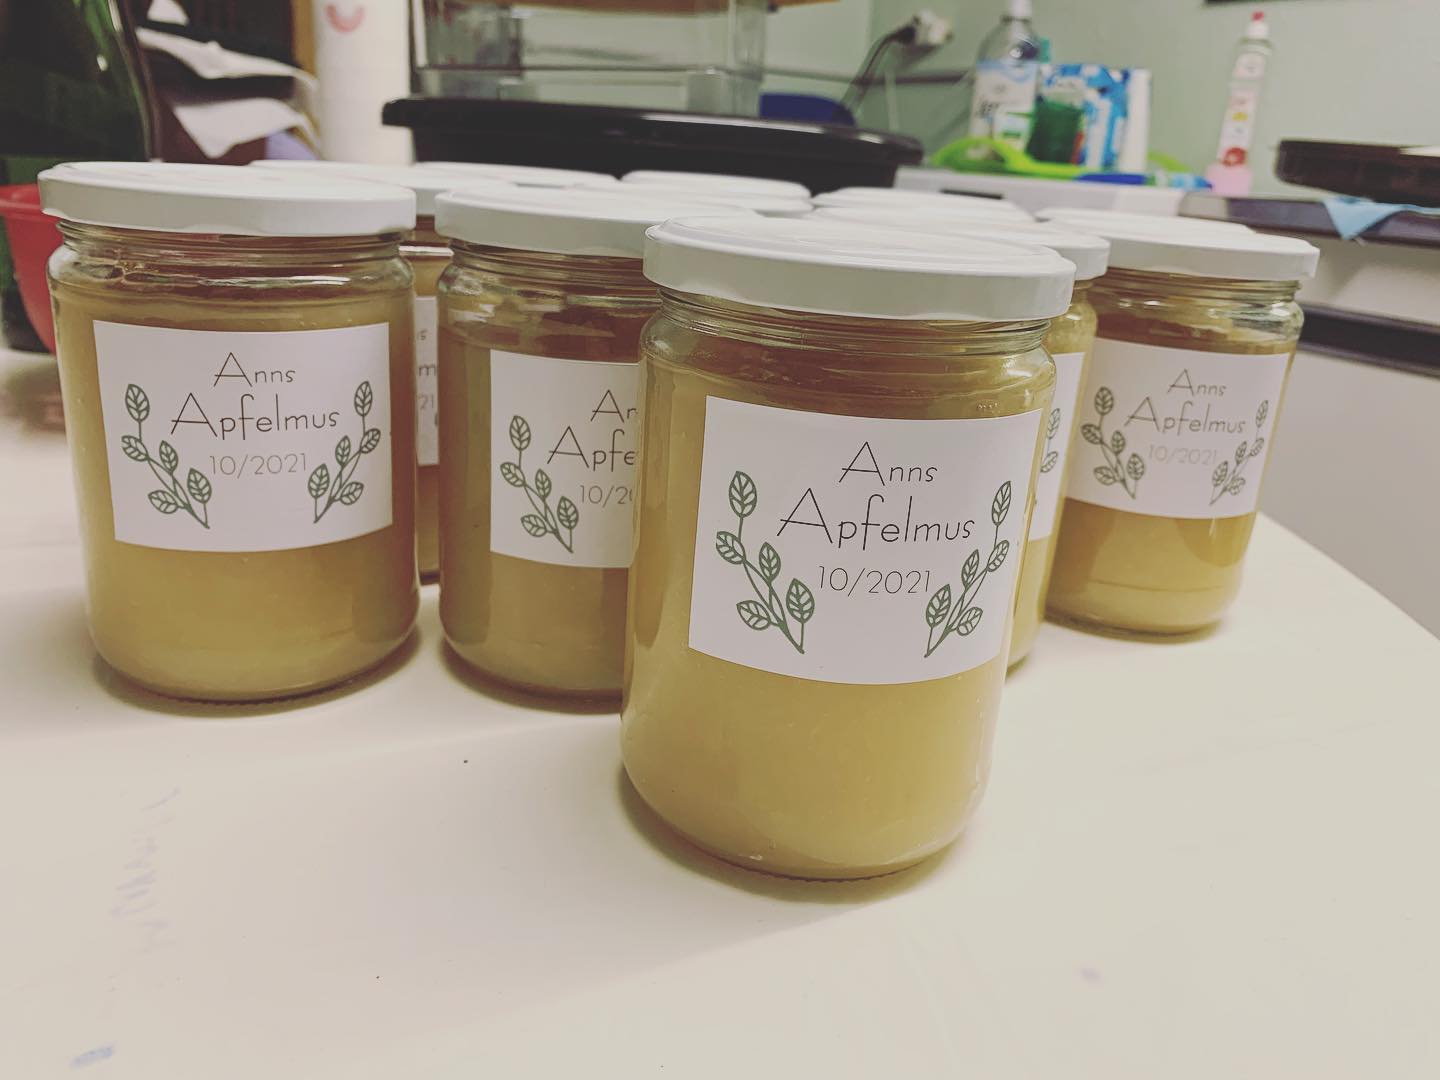 Restocked our pantry with homemade applesauce (12 jars with 550ml, from 9kg apples). Canned in a regular Weck hot water canner. Featuring apples by @obsthof_stenger #homemadefood #applesauce #canningandpreserving